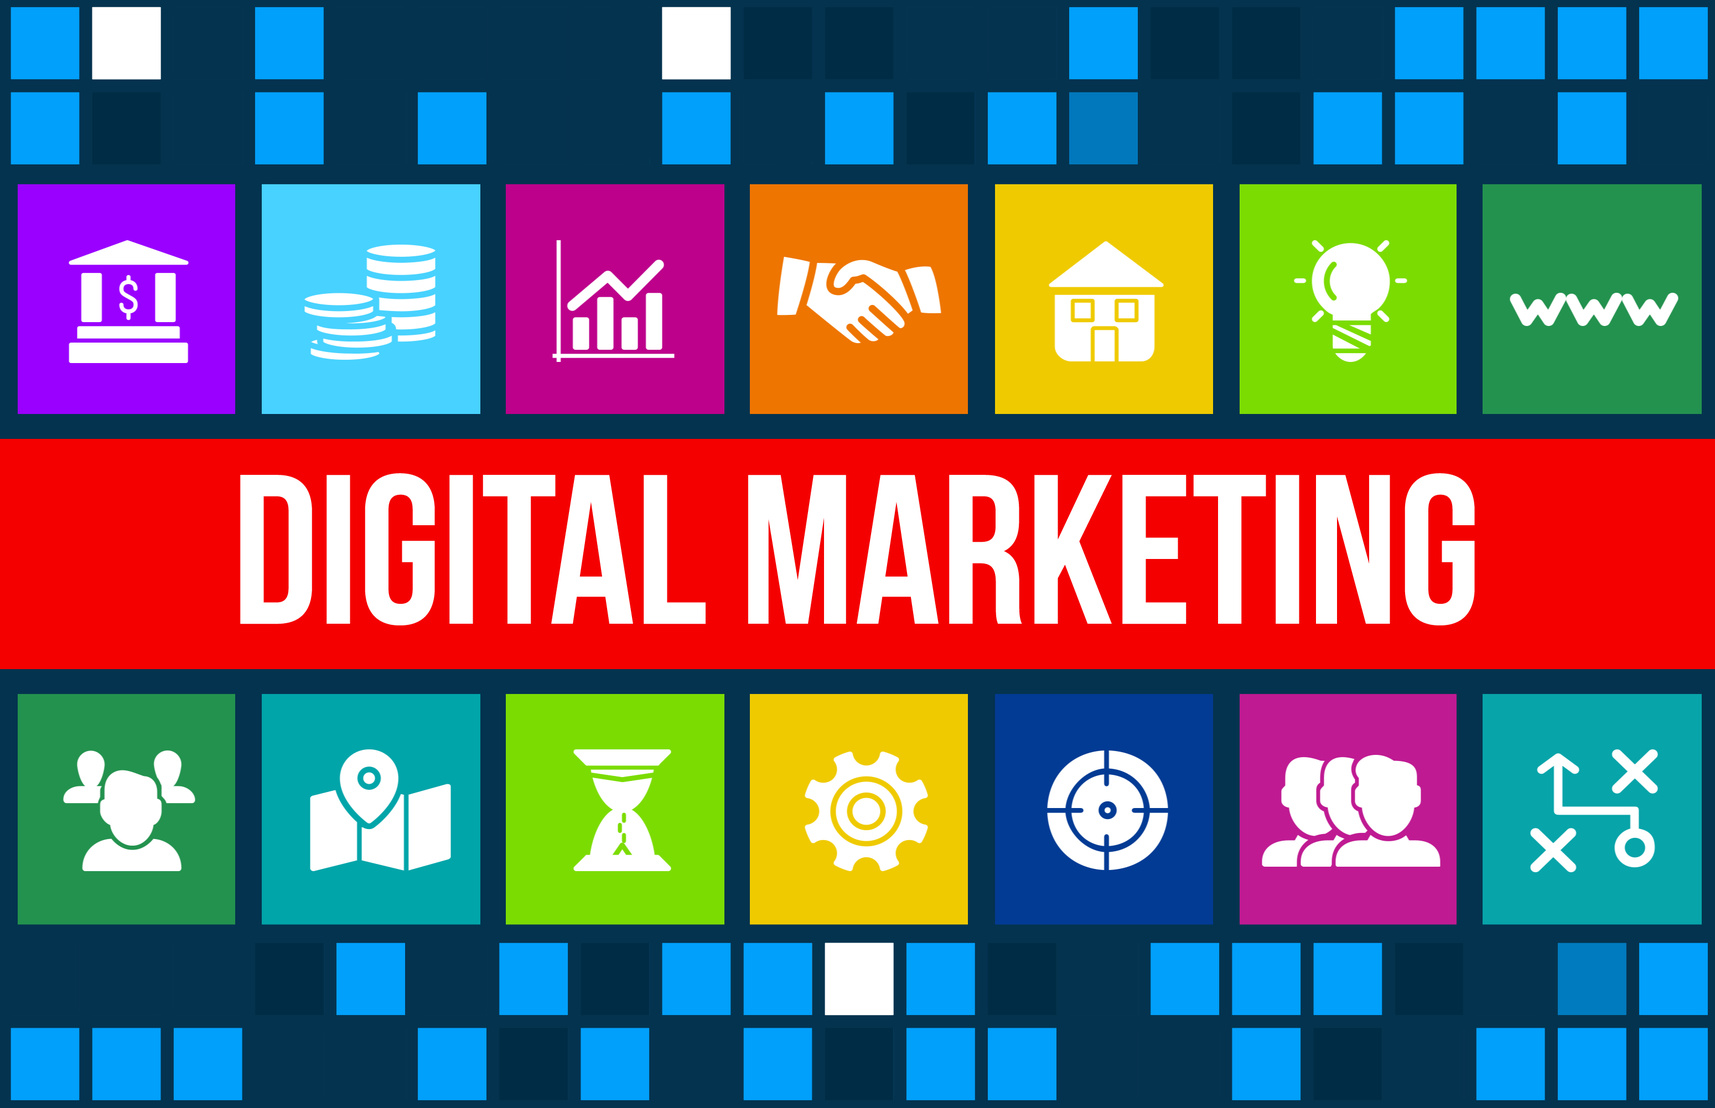 Digital Marketing concept image with business icons and copyspace.